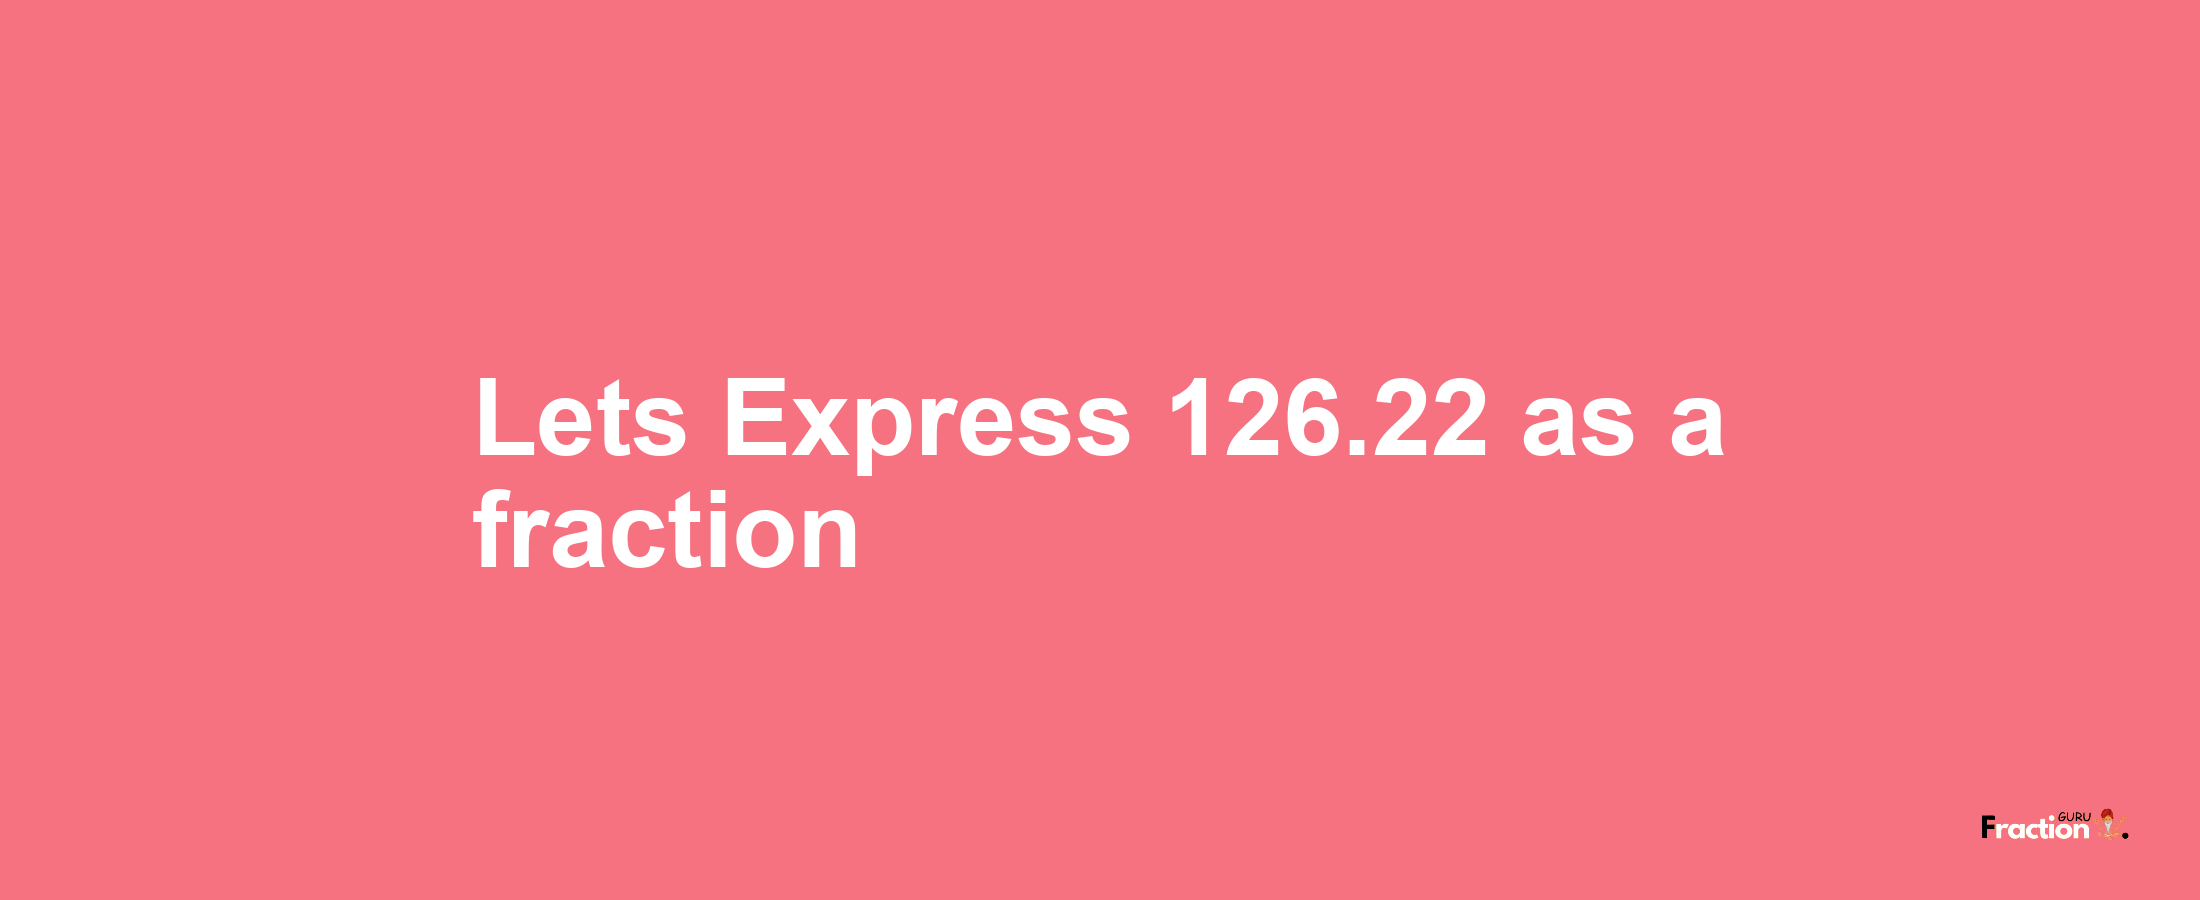 Lets Express 126.22 as afraction